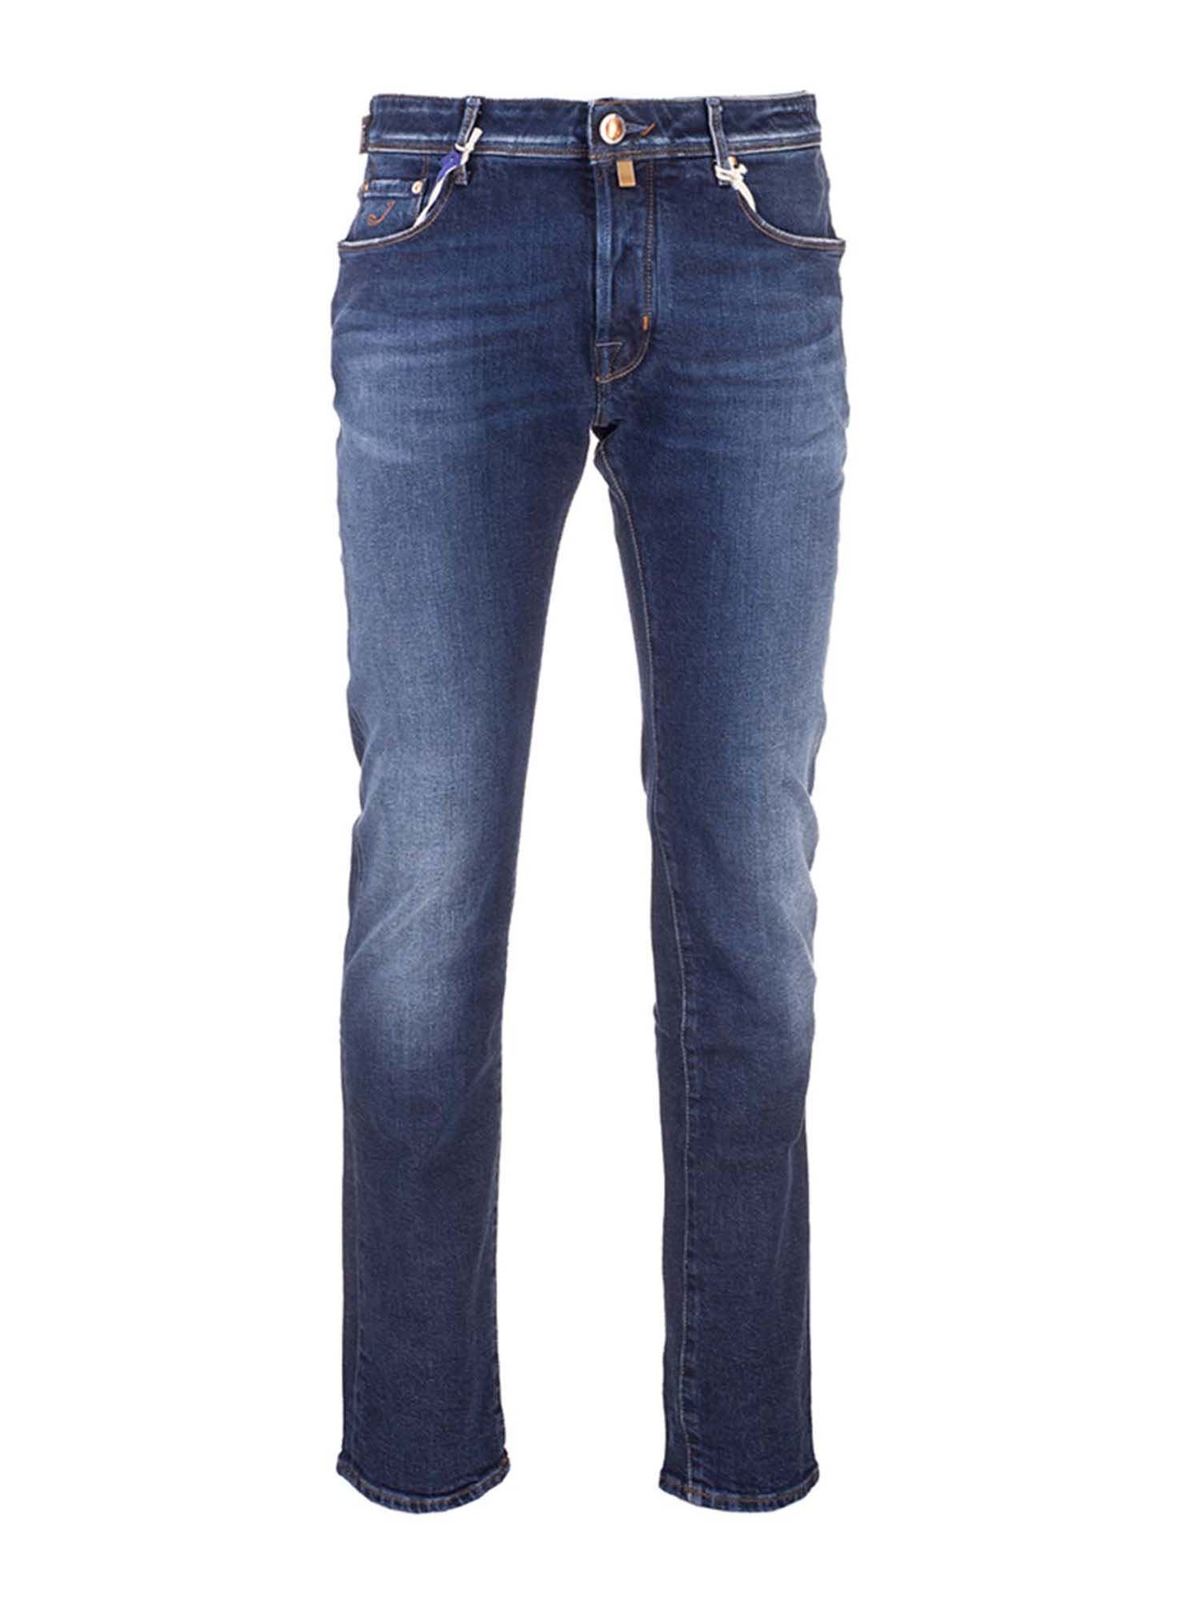 JACOB COHEN LEATHER LOGO LABEL JEANS IN BLUE